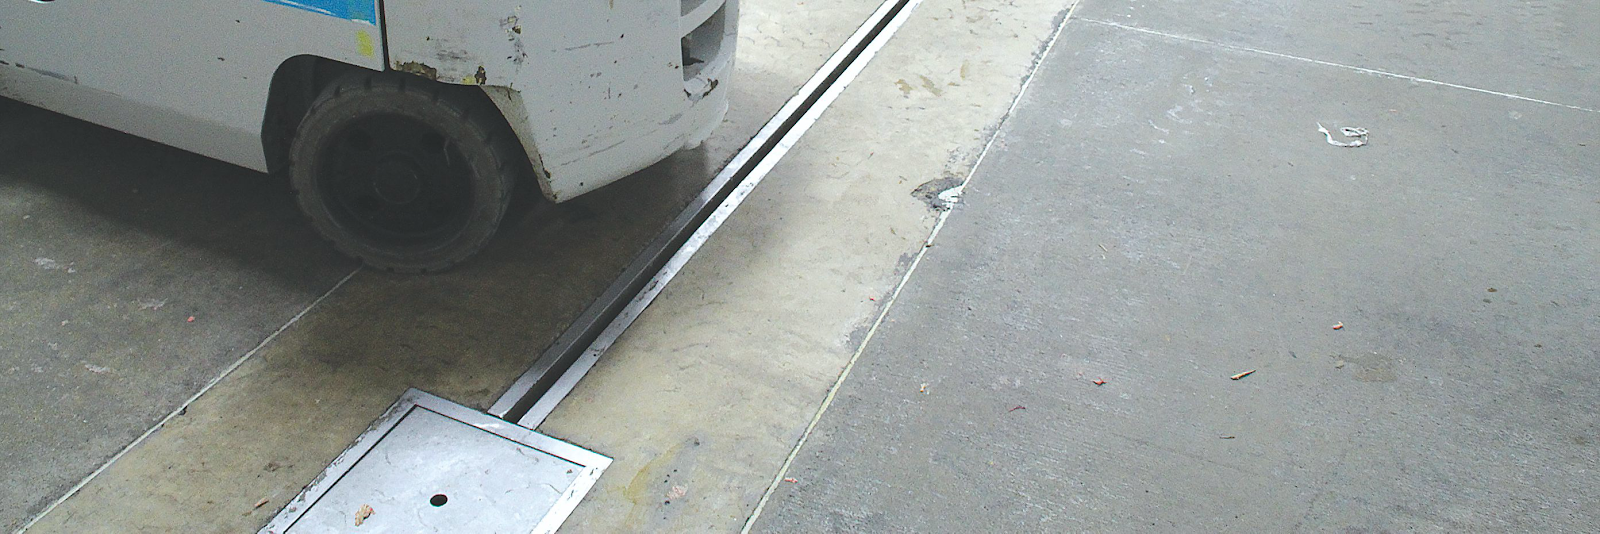 7 Benefits Of Slot Drain As A Warehouse Drainage System 4 